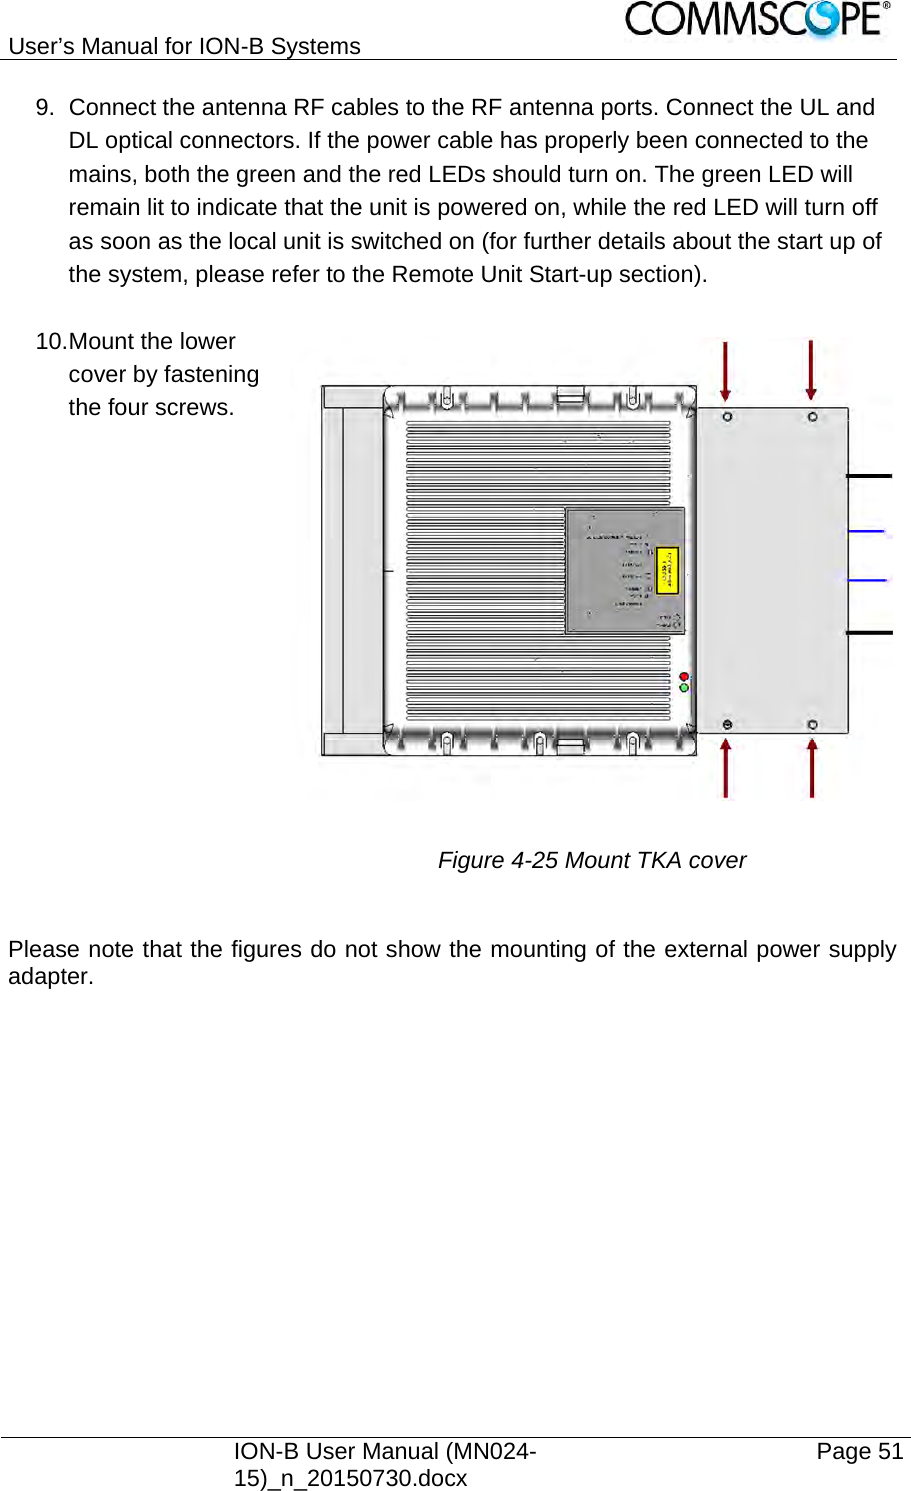 User’s Manual for ION-B Systems    ION-B User Manual (MN024-15)_n_20150730.docx  Page 51 9.  Connect the antenna RF cables to the RF antenna ports. Connect the UL and DL optical connectors. If the power cable has properly been connected to the mains, both the green and the red LEDs should turn on. The green LED will remain lit to indicate that the unit is powered on, while the red LED will turn off as soon as the local unit is switched on (for further details about the start up of the system, please refer to the Remote Unit Start-up section).  10. Mount the lower cover by fastening the four screws.                      Figure 4-25 Mount TKA cover  Please note that the figures do not show the mounting of the external power supply adapter.   